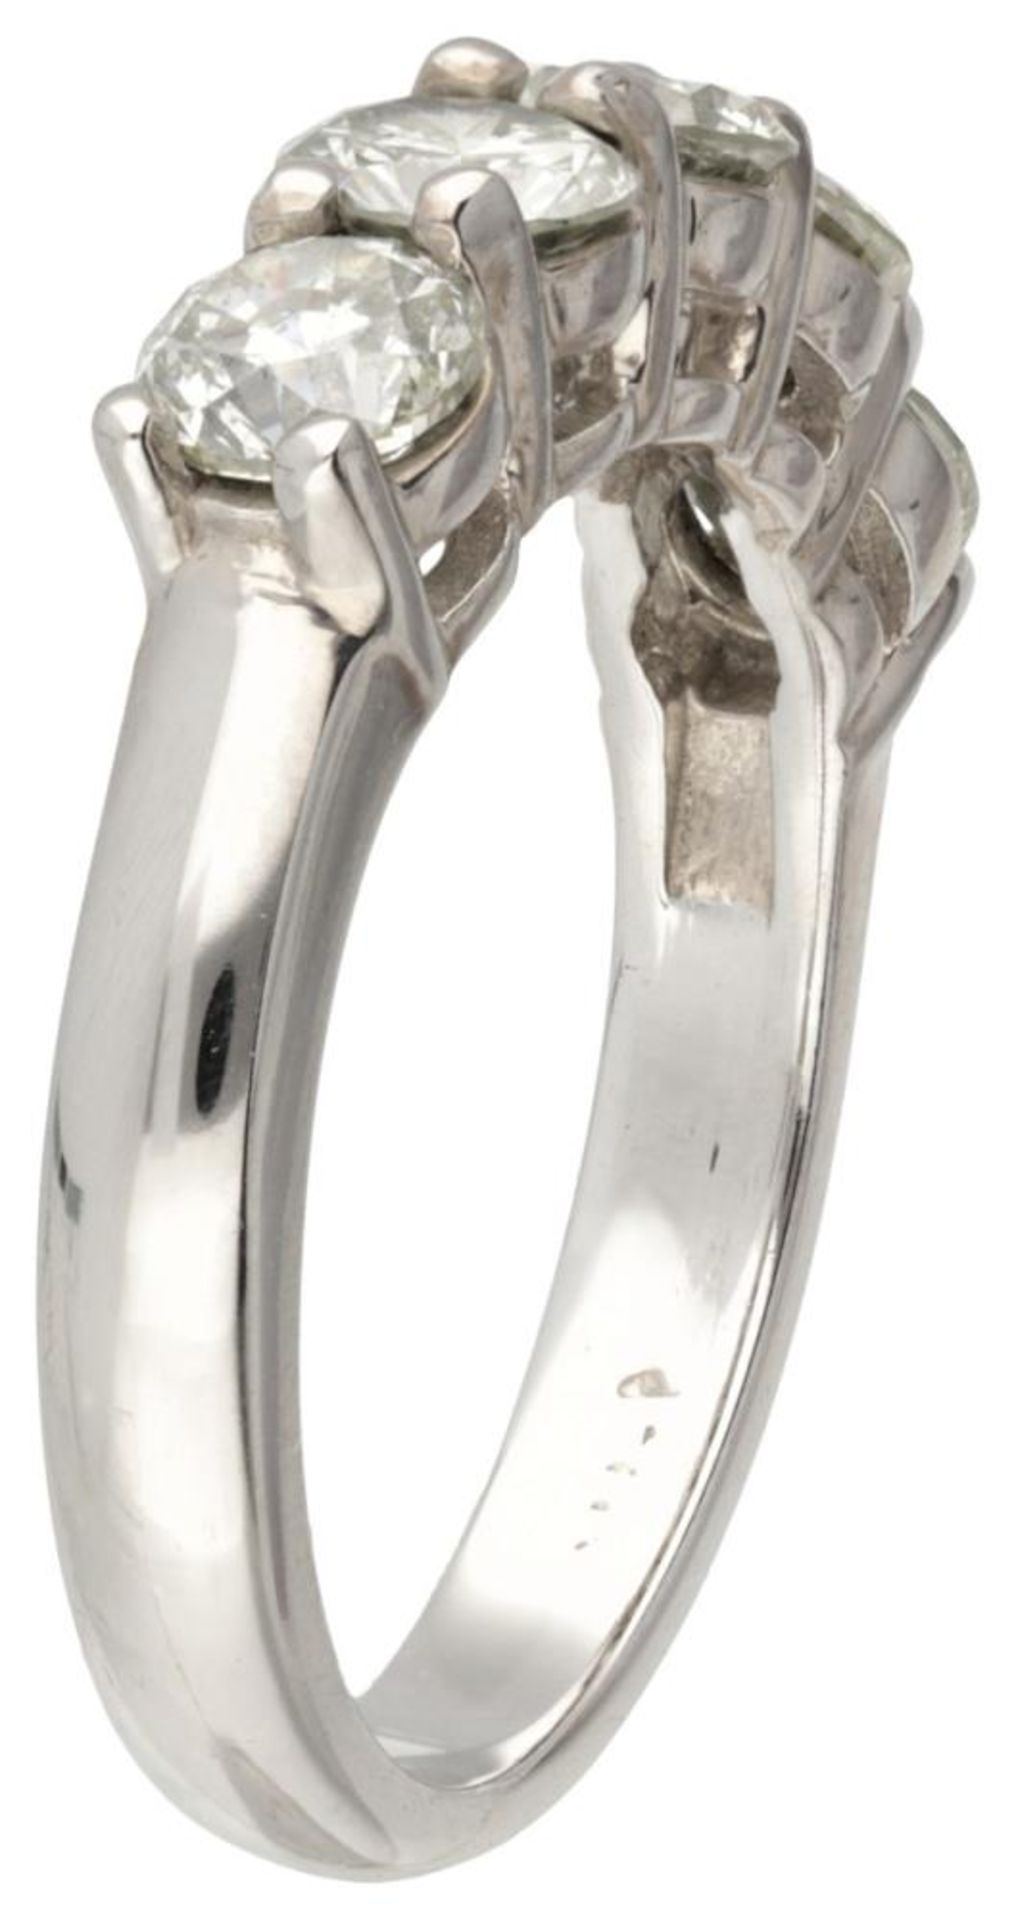 14K. White gold alliance ring set with approx. 1.47 ct. diamond. - Image 3 of 4